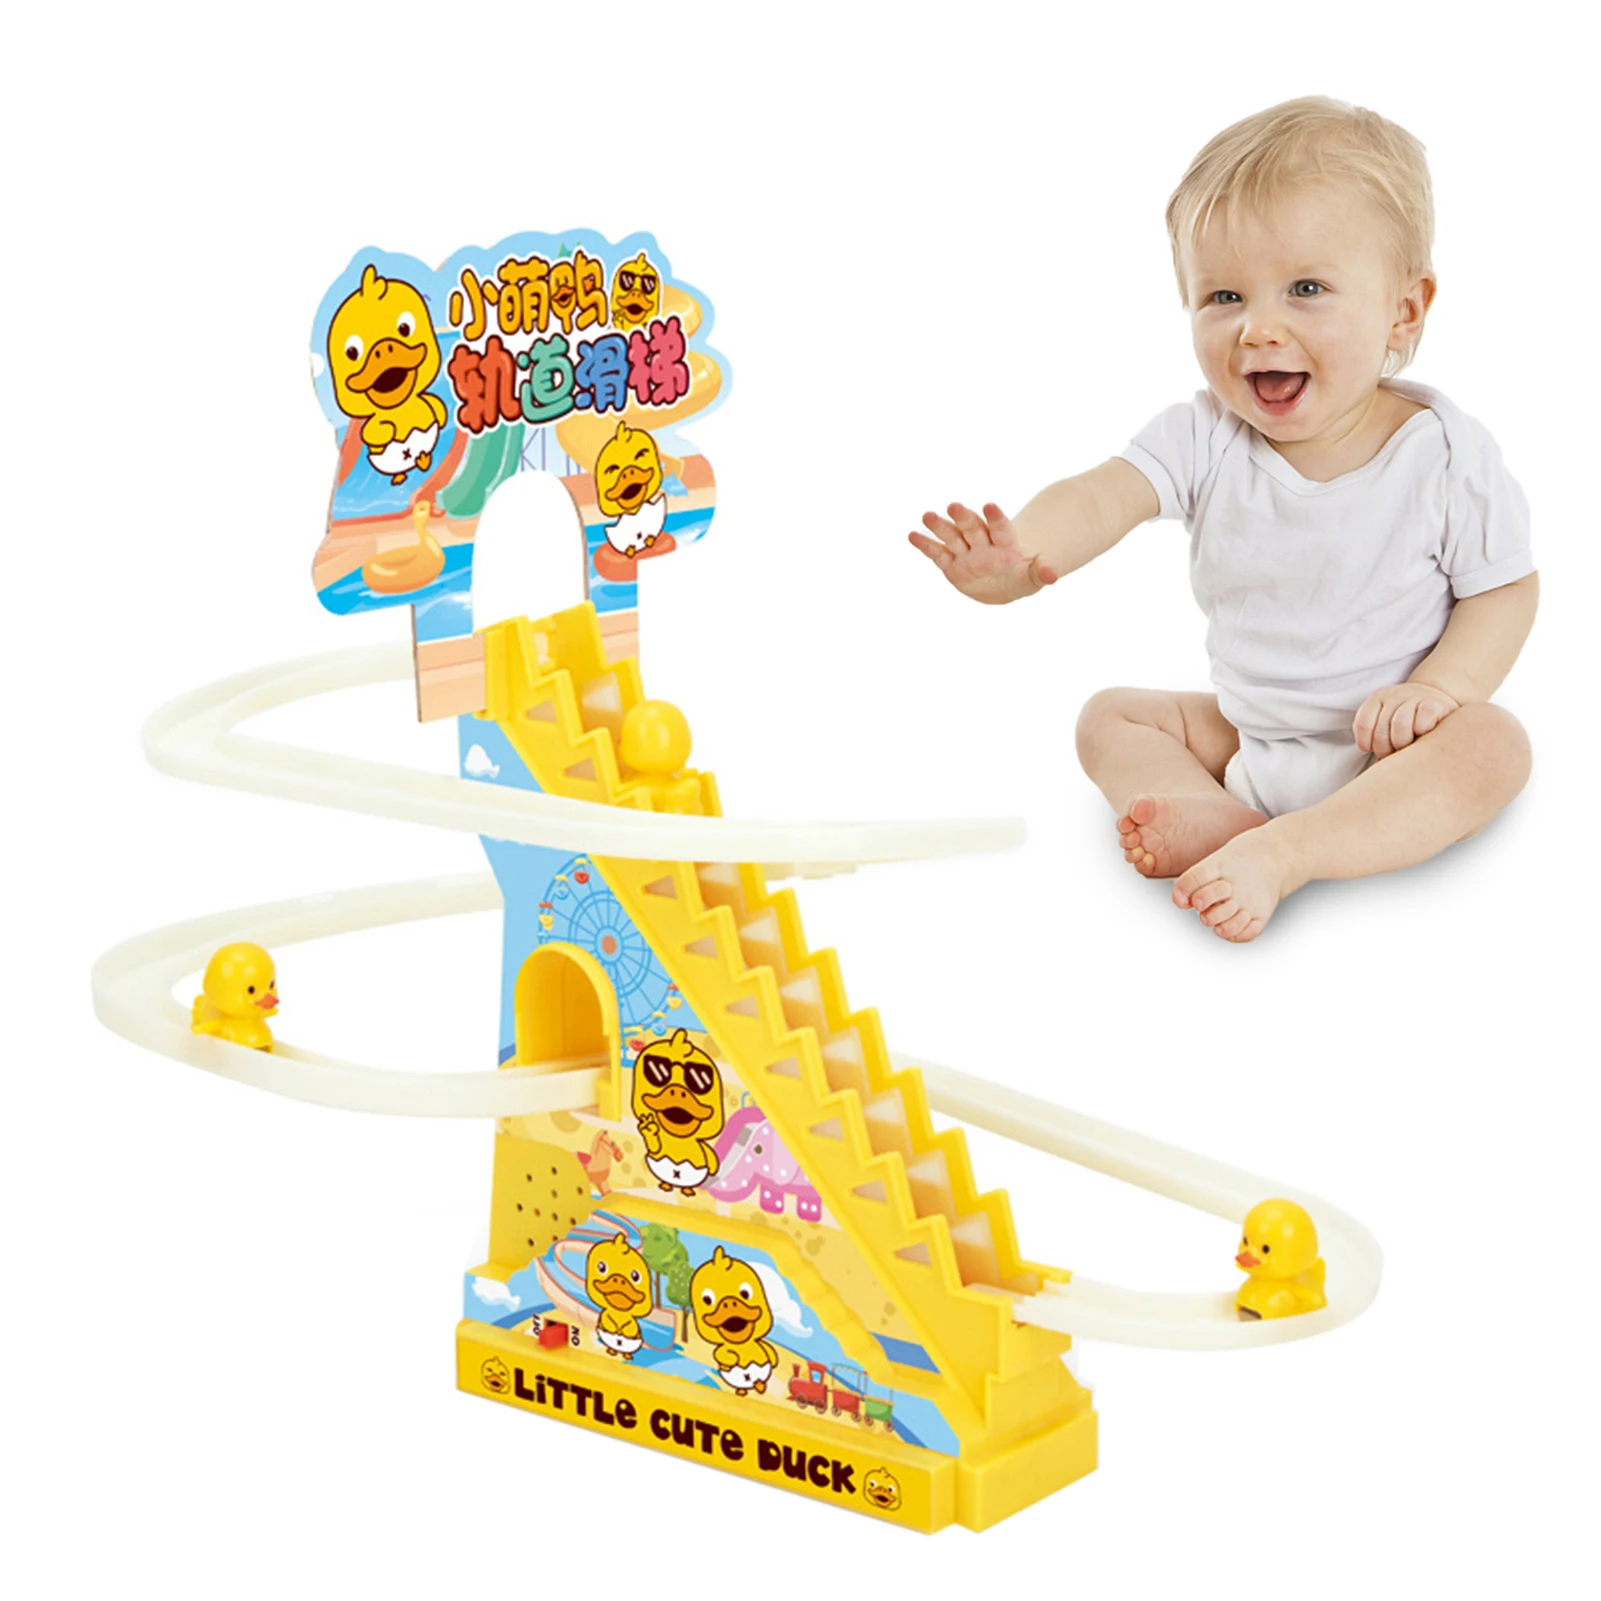 

Small Ducks Climbing Toys Electric Ducks Chasing Race Track Game Set Electric Slide Roller Coaster Set For 3 4 5 6-Year-Old Boys